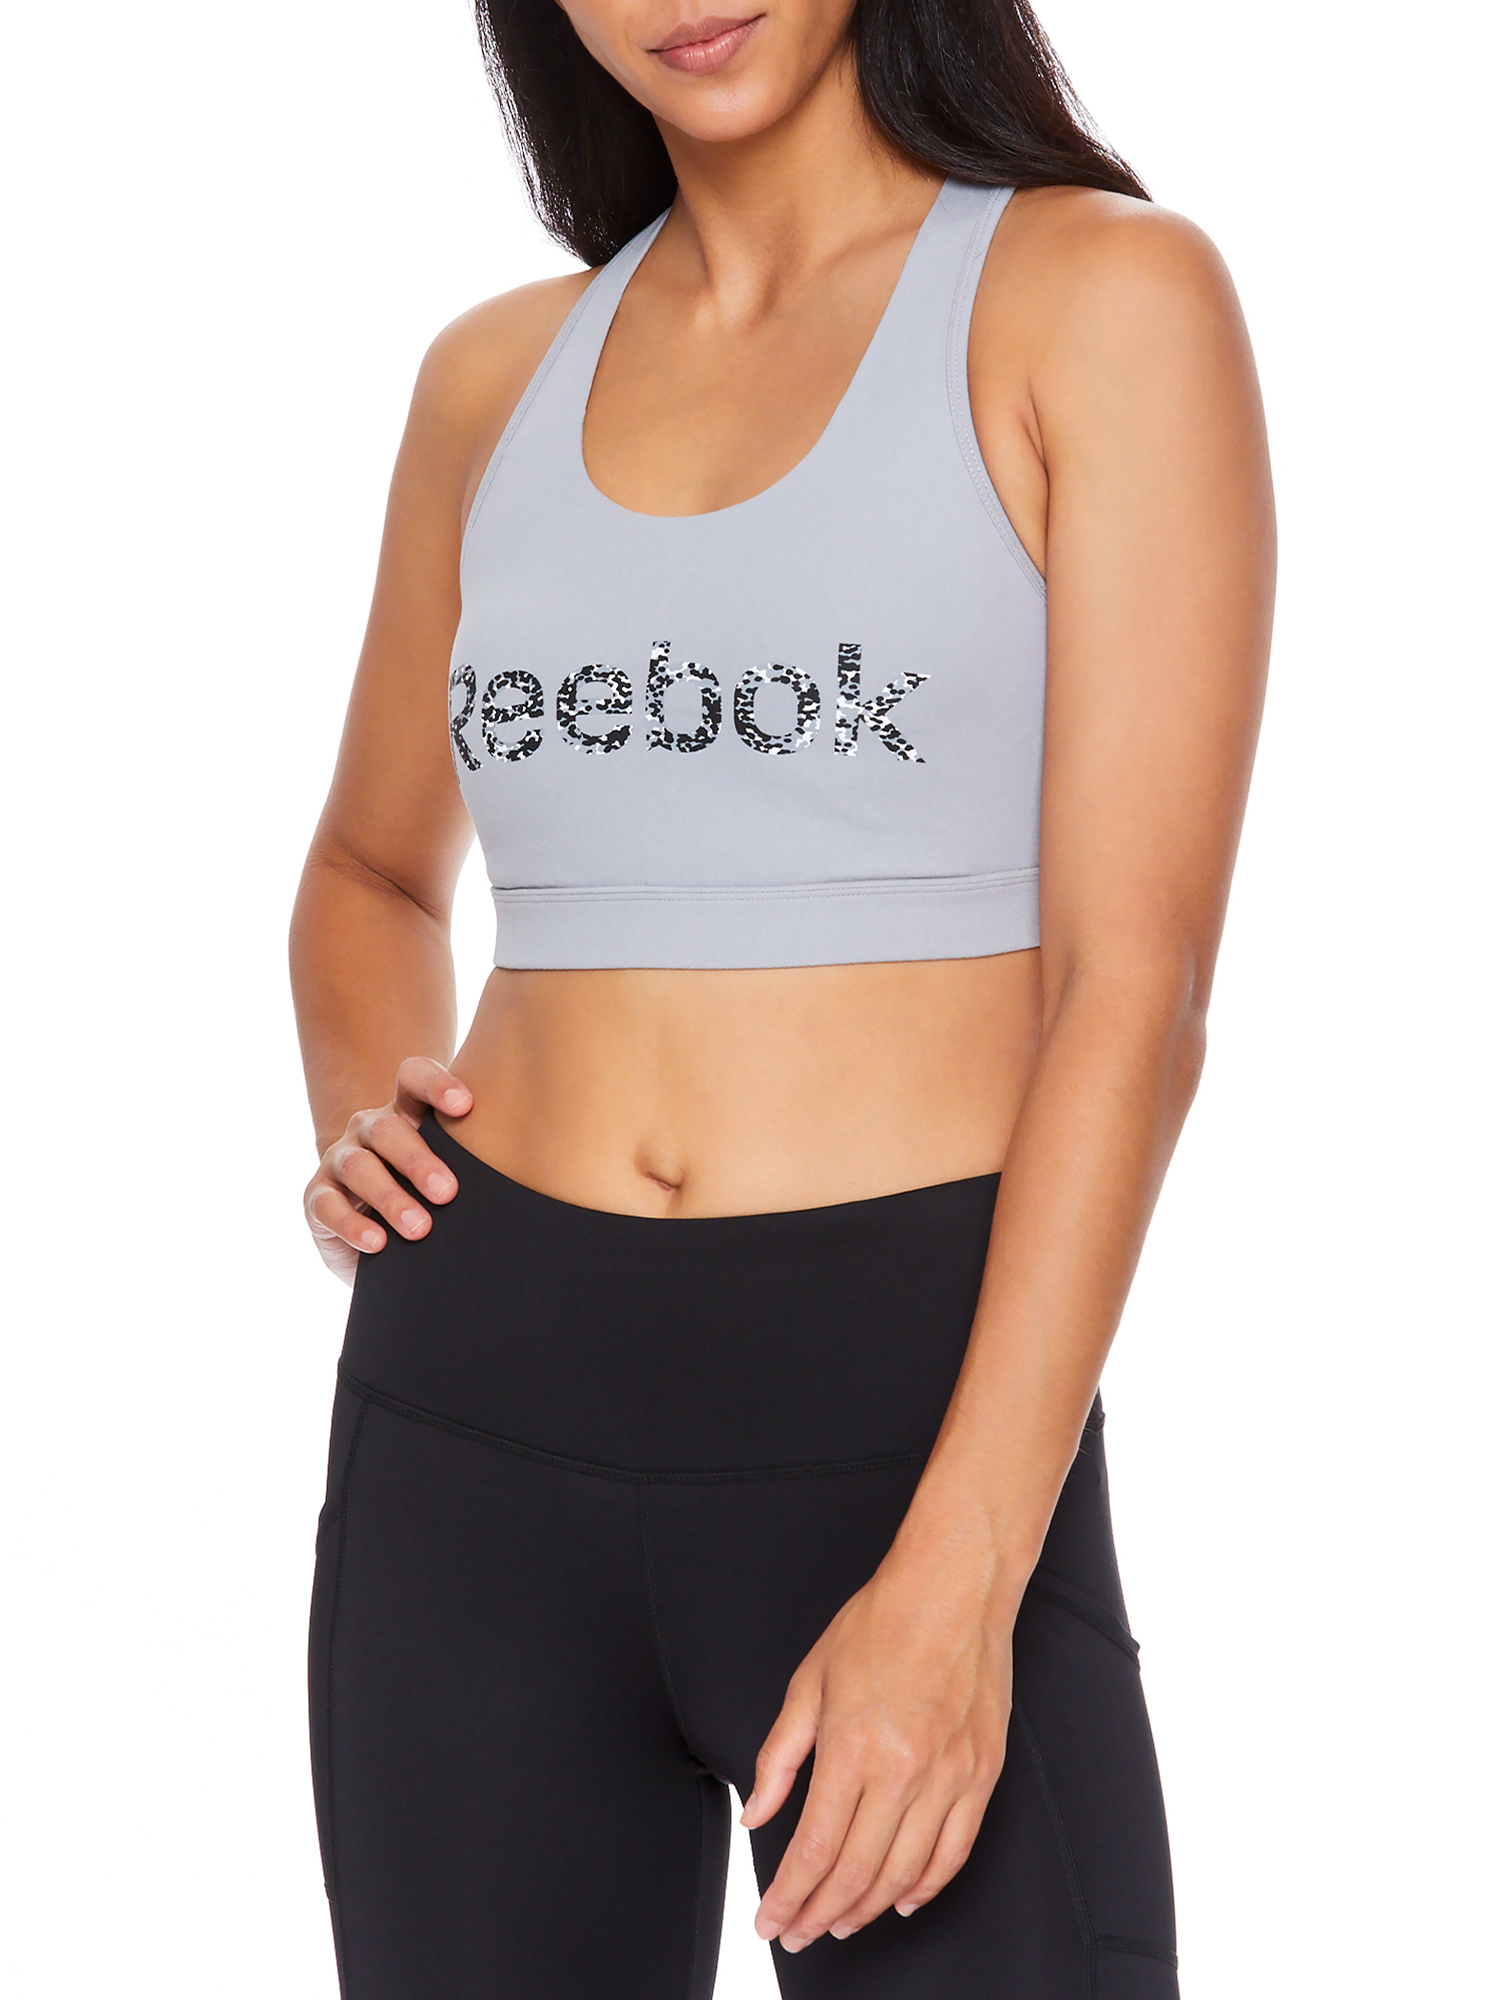 Reebok Womens Medium Impact Strappy Racerback Graphic Bra with Removable Cups, Size XS-XXXL - image 1 of 4